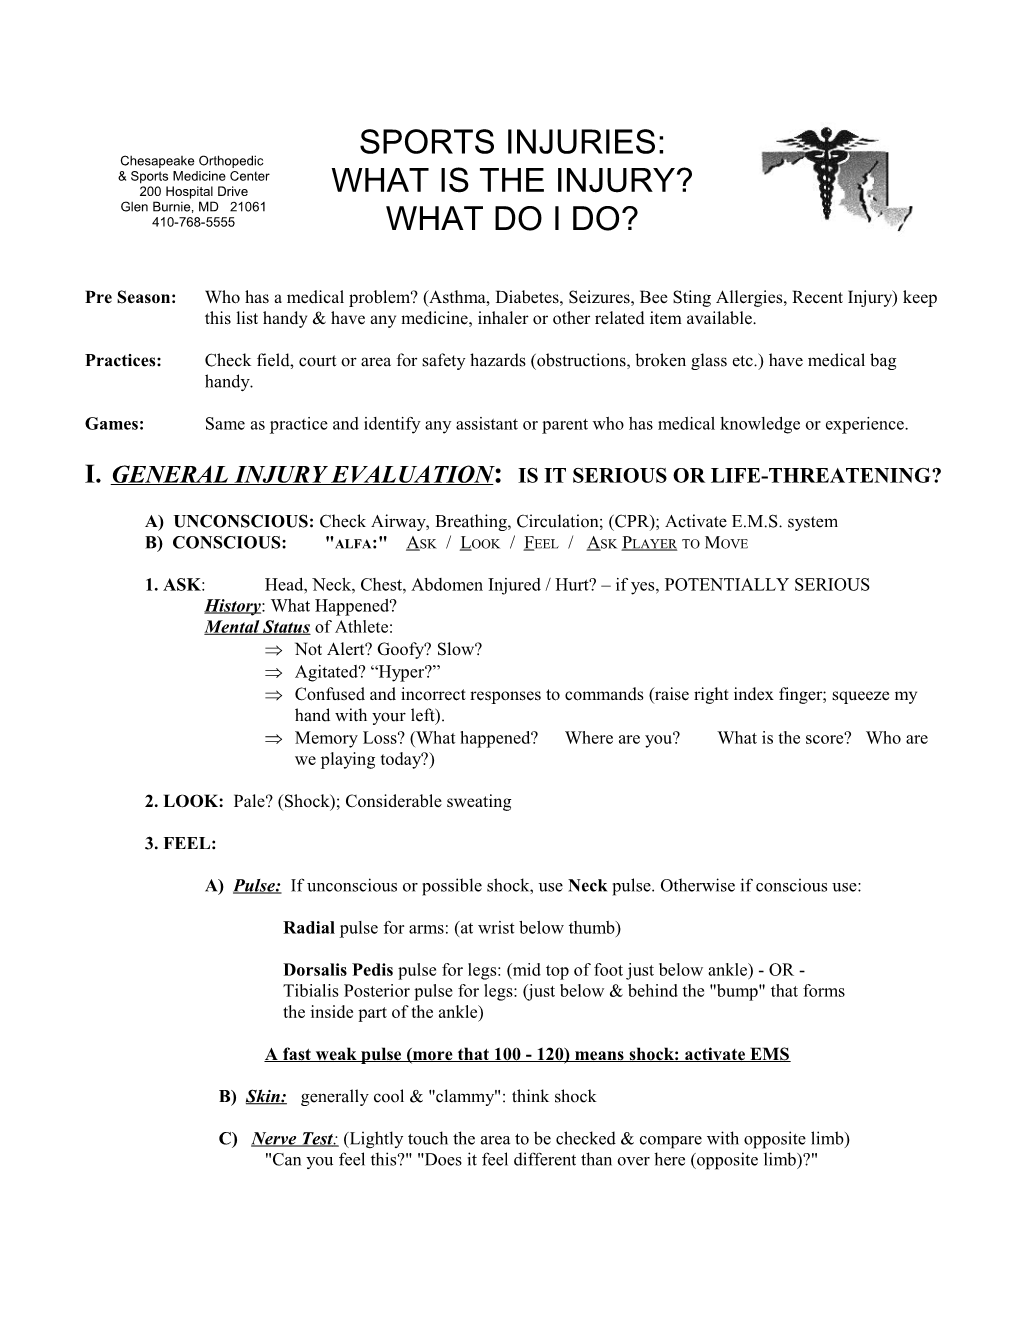 Injury Evaluation and First Aid